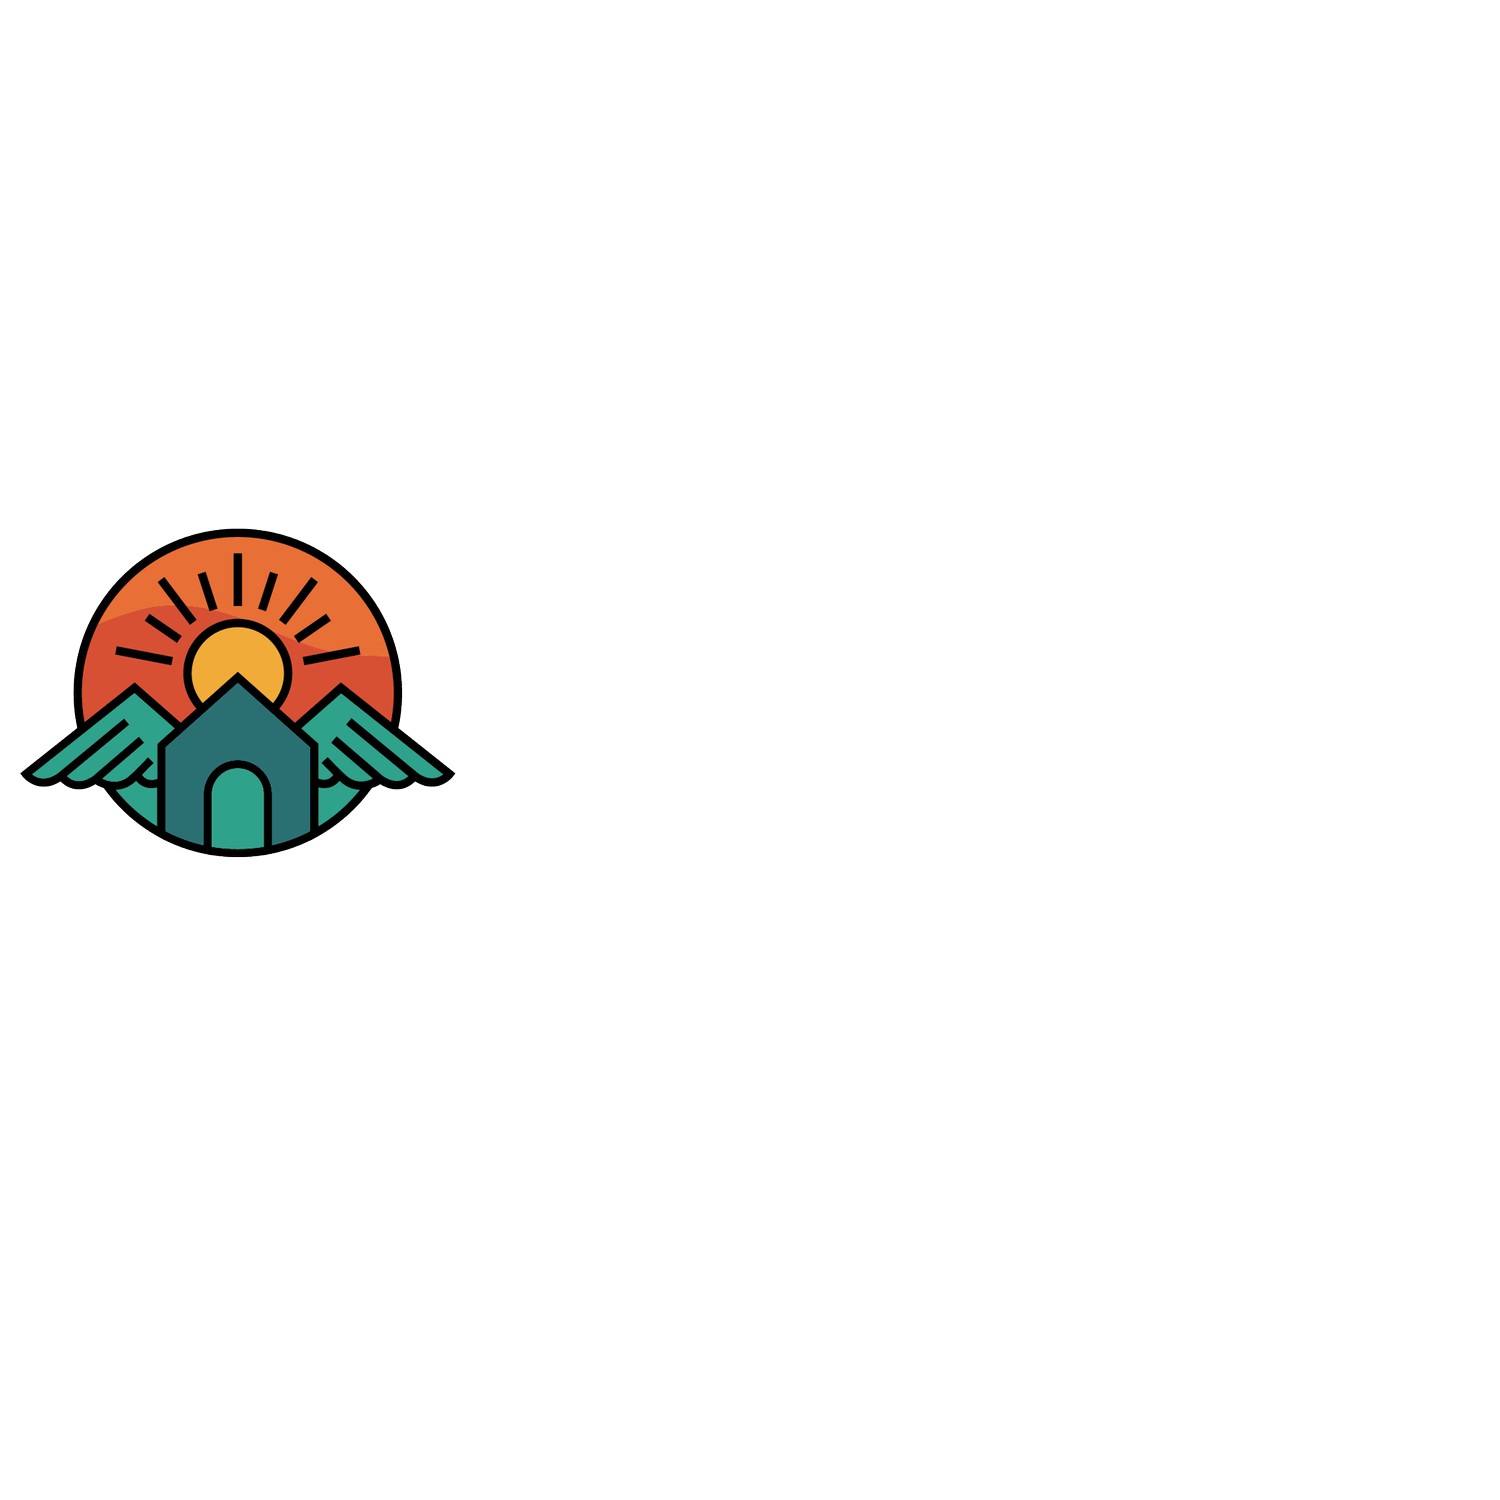 Tudor House Suicide Prevention, Education and Support 